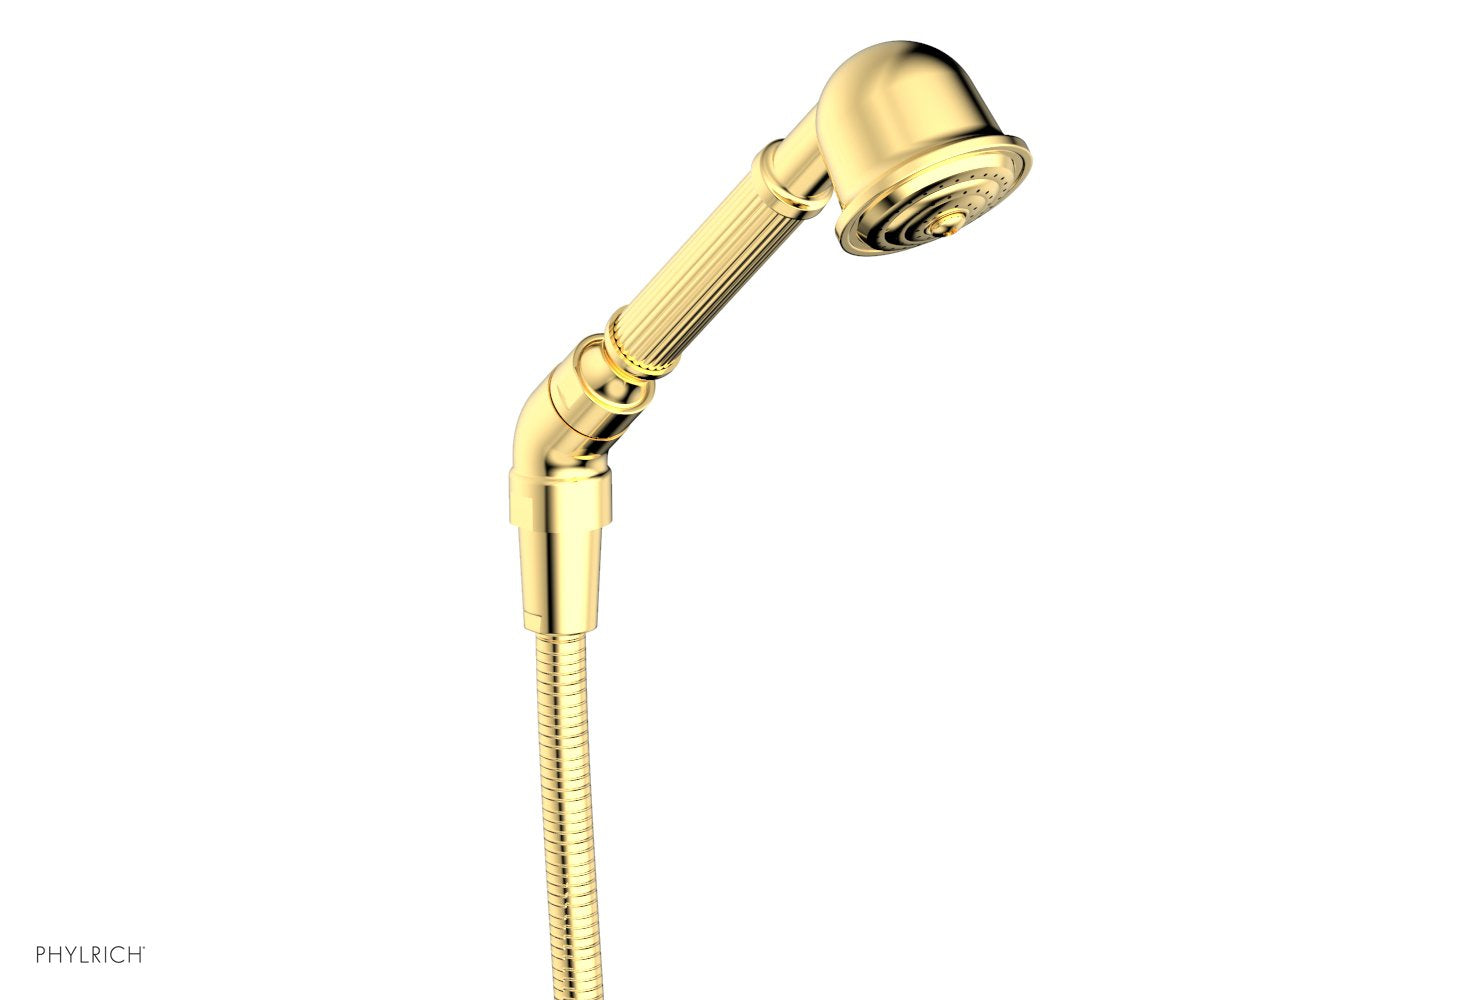 Phylrich GEORGIAN & BARCELONA Hand Shower with Hose